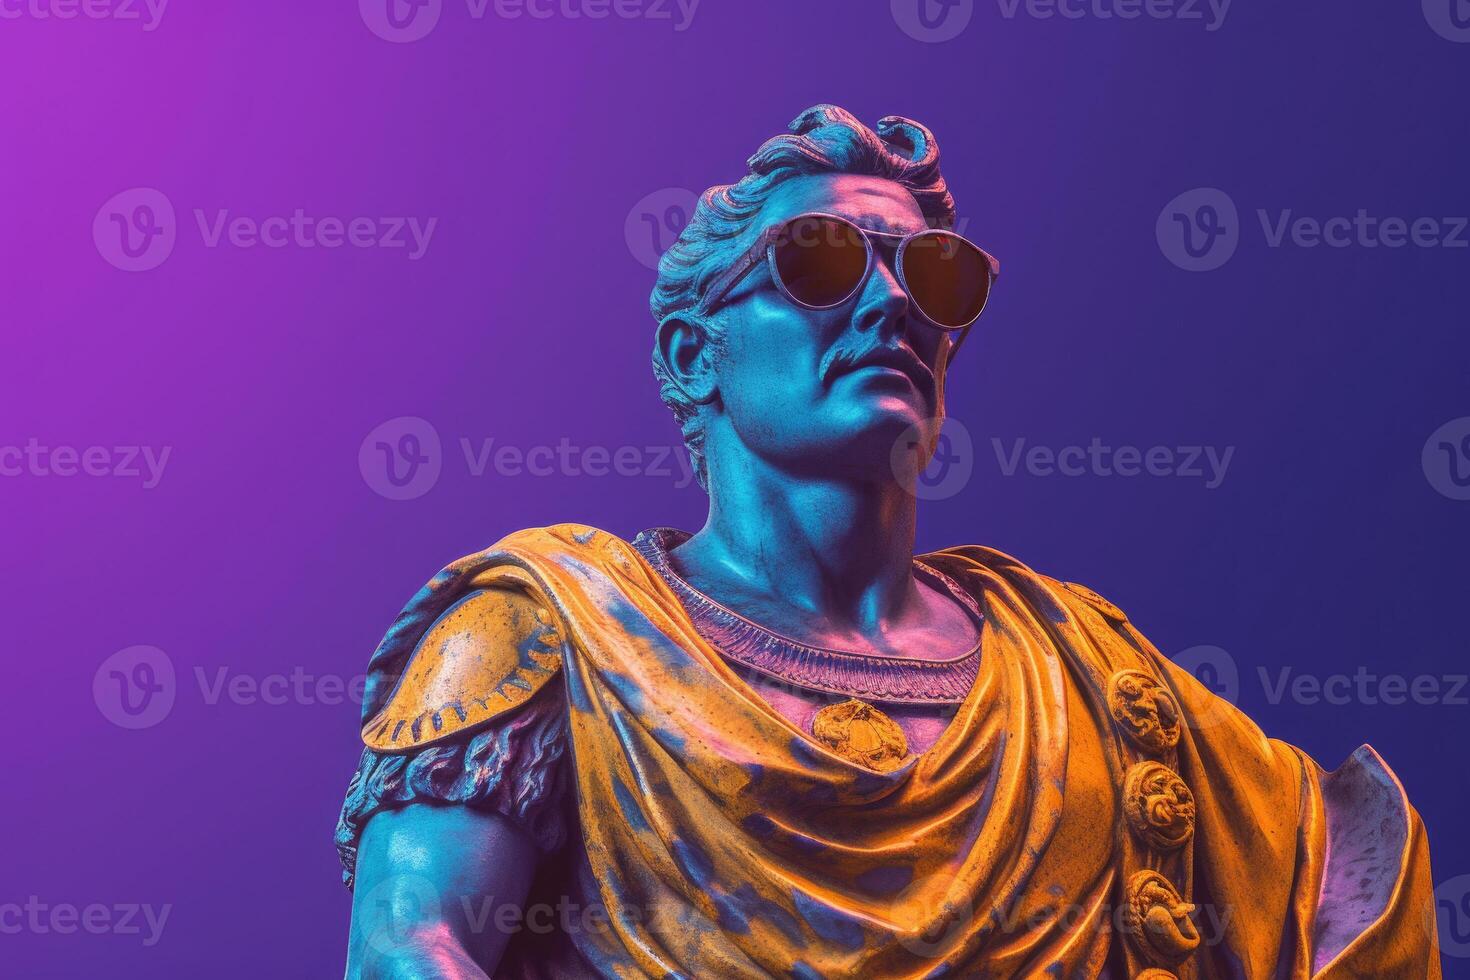 Gypsum statue in sunglasses on colored abstract background. photo